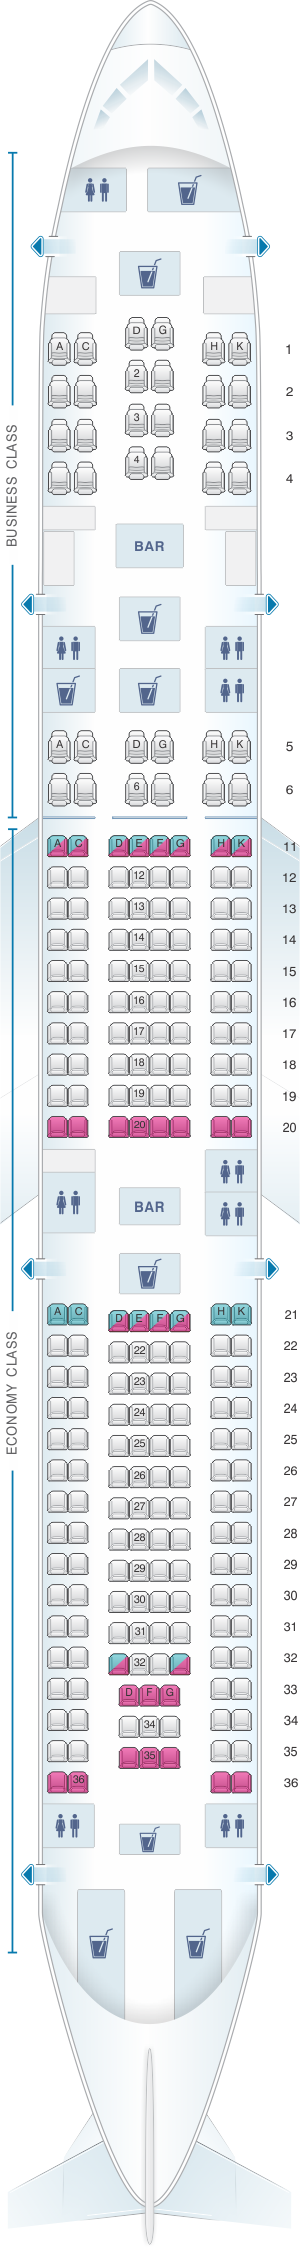 A340 500 Seating Chart